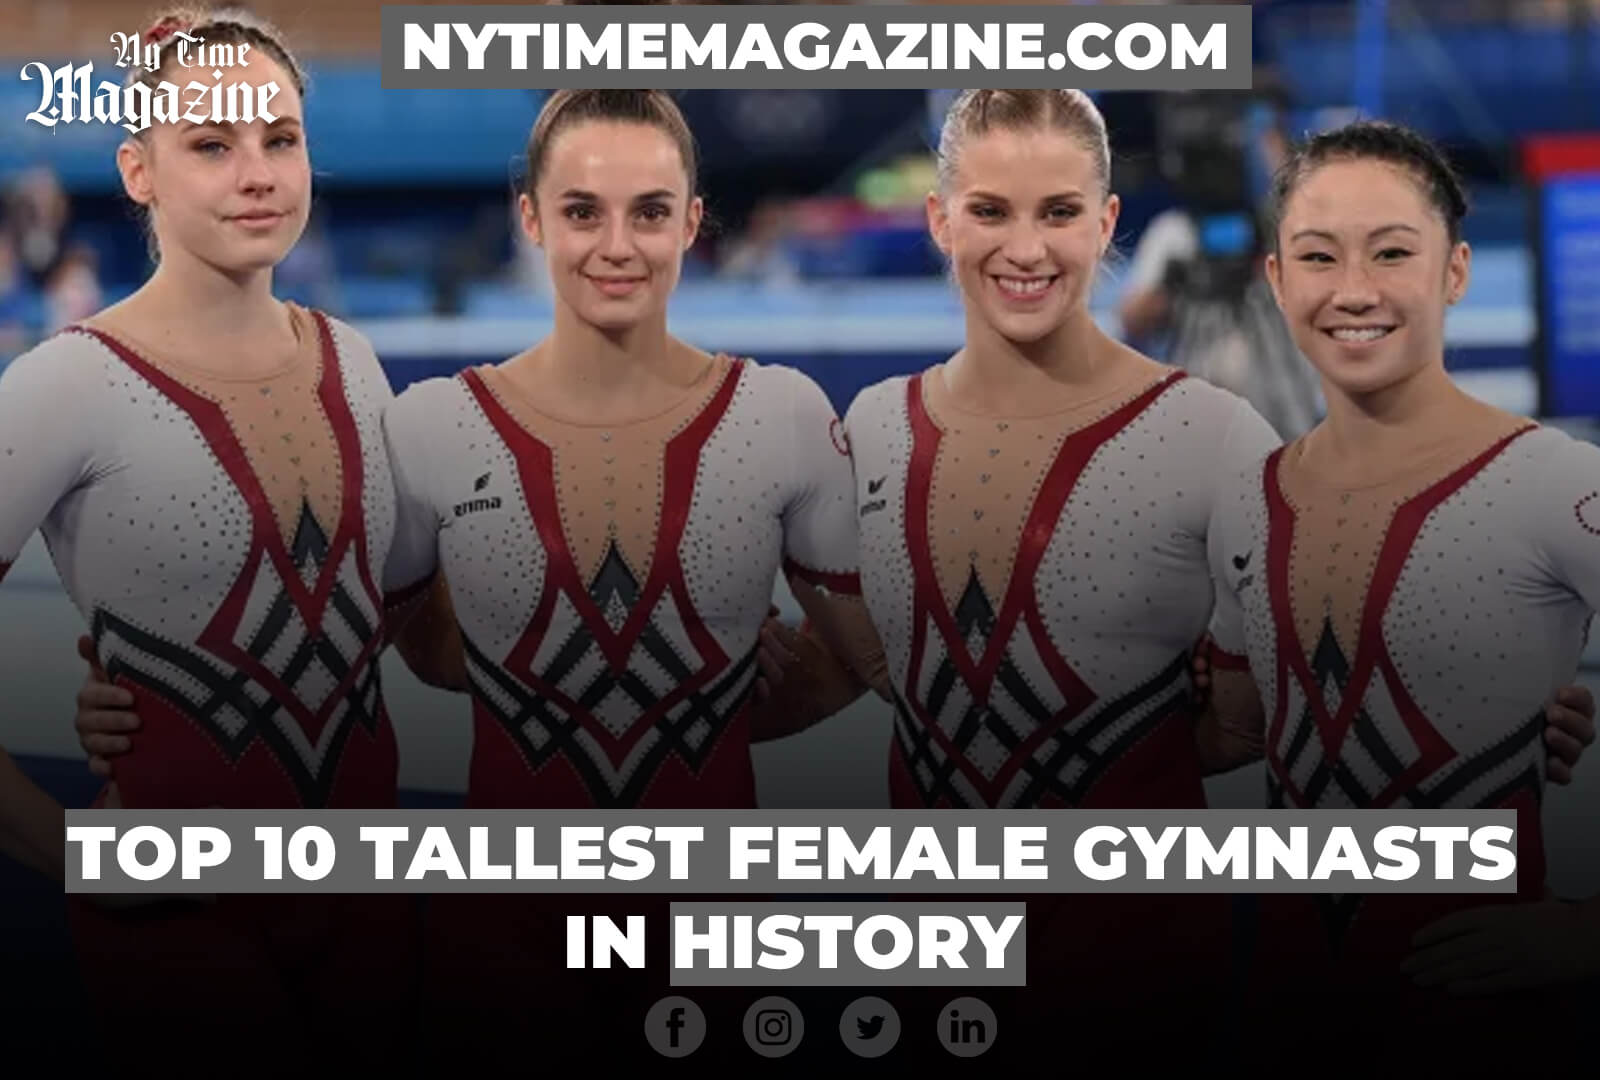 TOP 10 TALLEST FEMALE GYMNASTS IN HISTORY